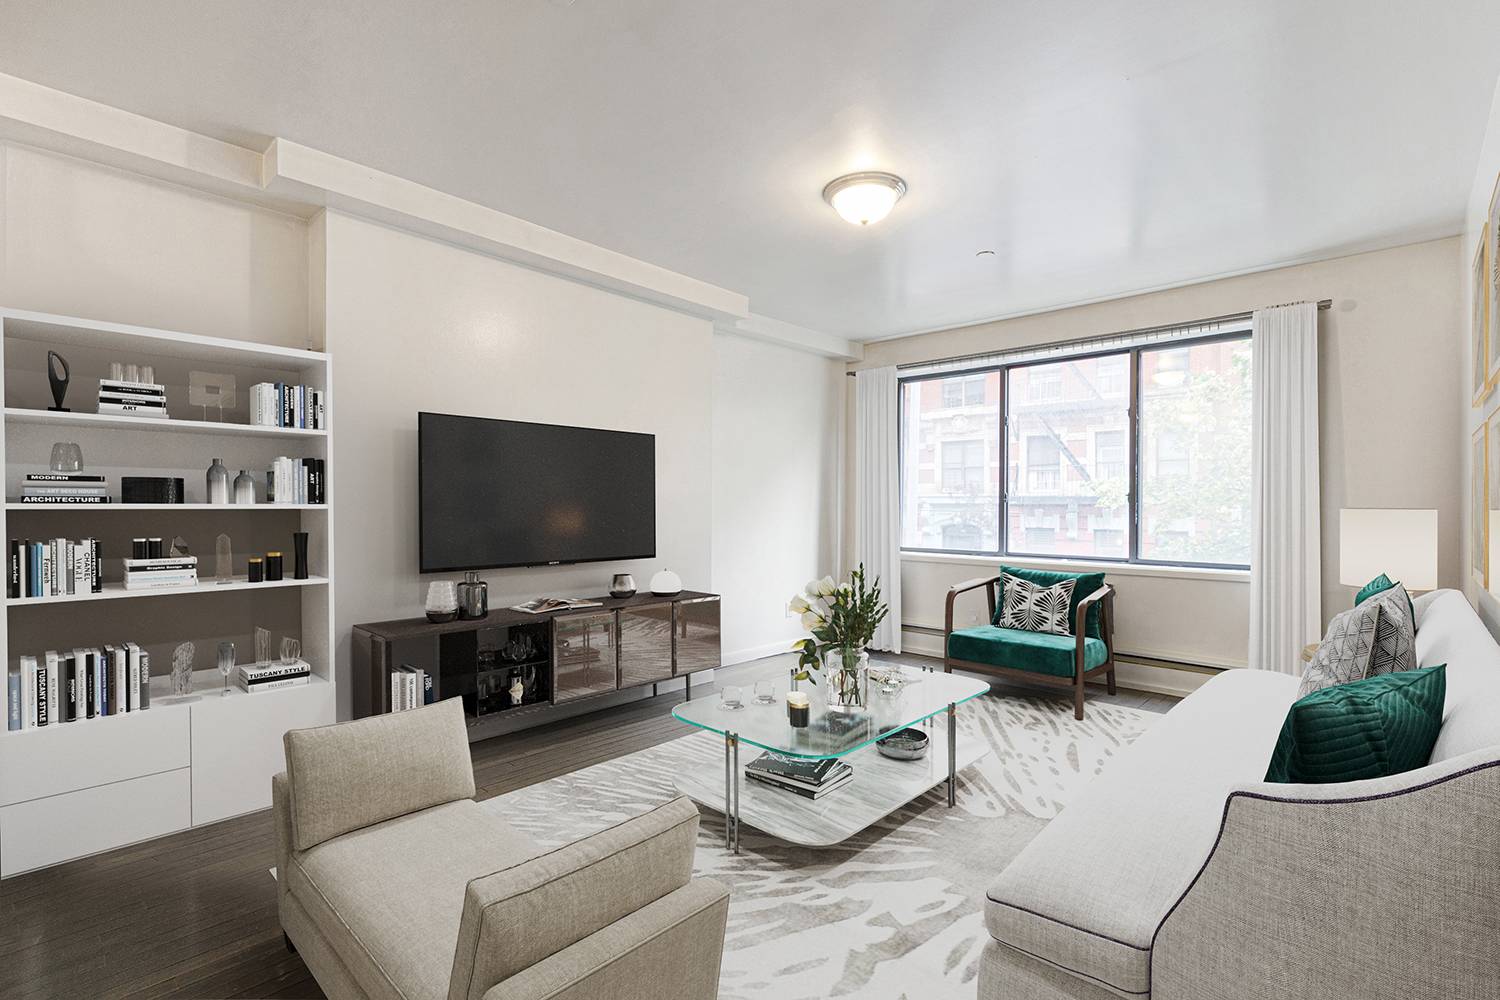 One Bedroom Condo For rent, just few blocks North of E96th Street!